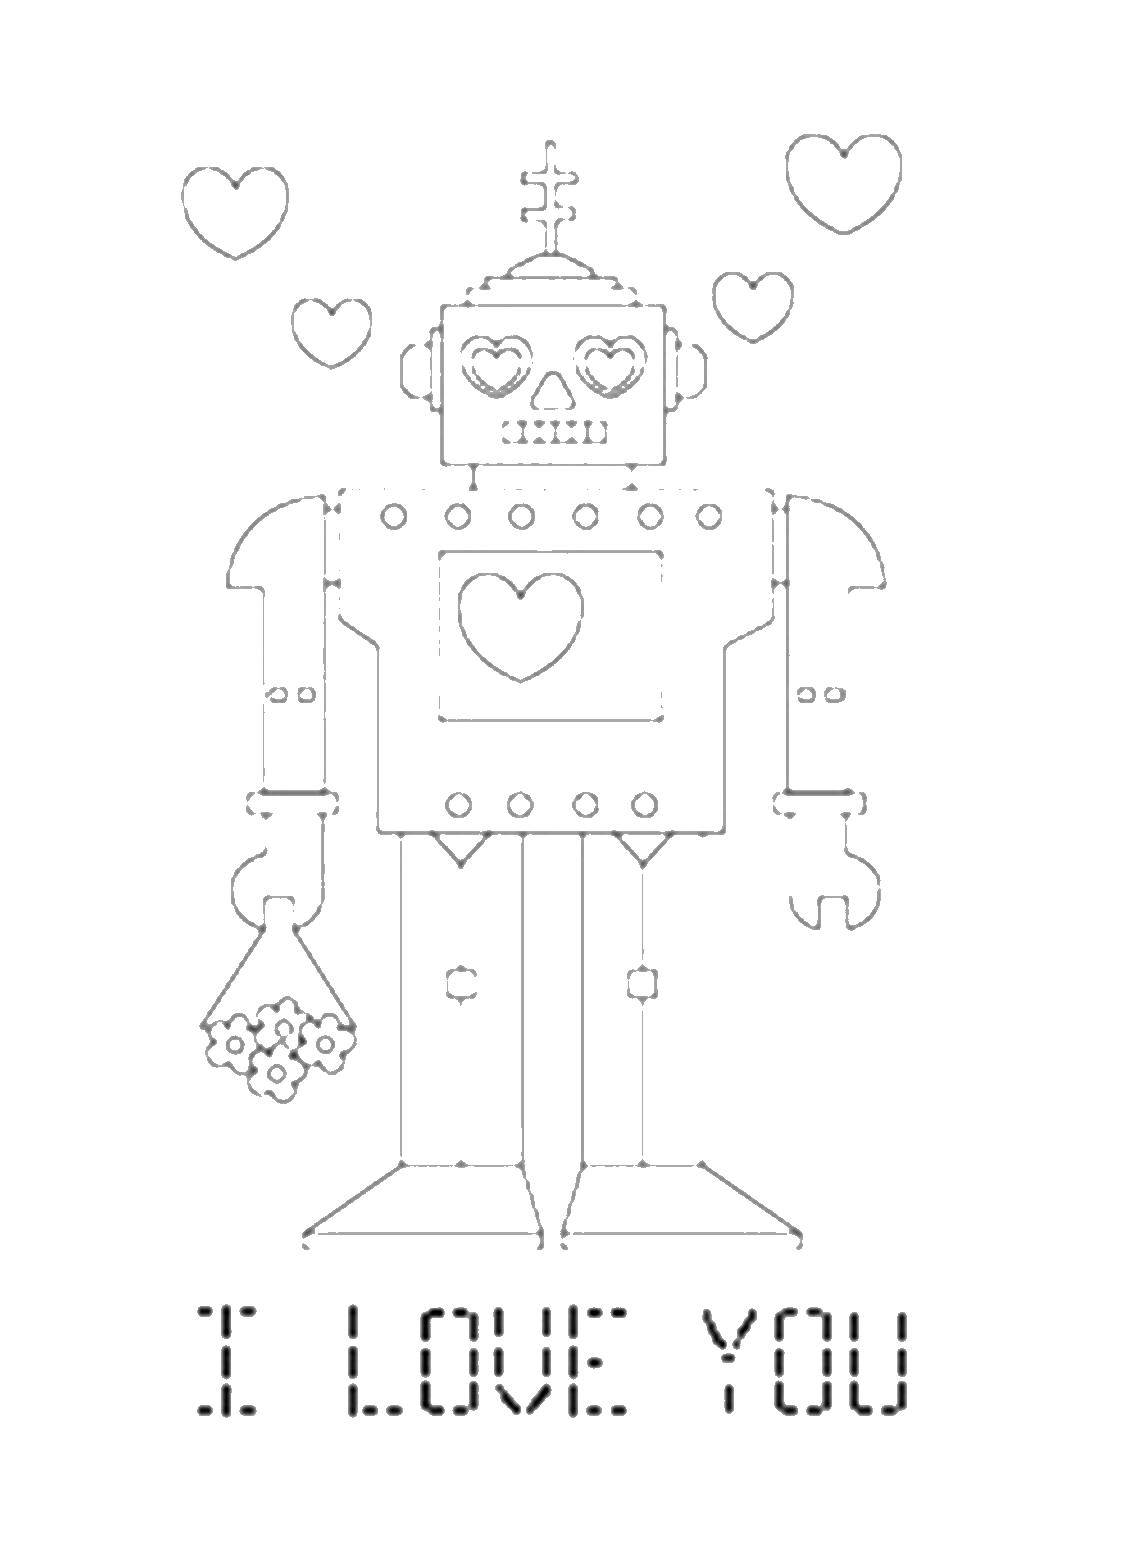 Coloring Robot, I love you. Category I love you. Tags:  I love you, robot, heart.